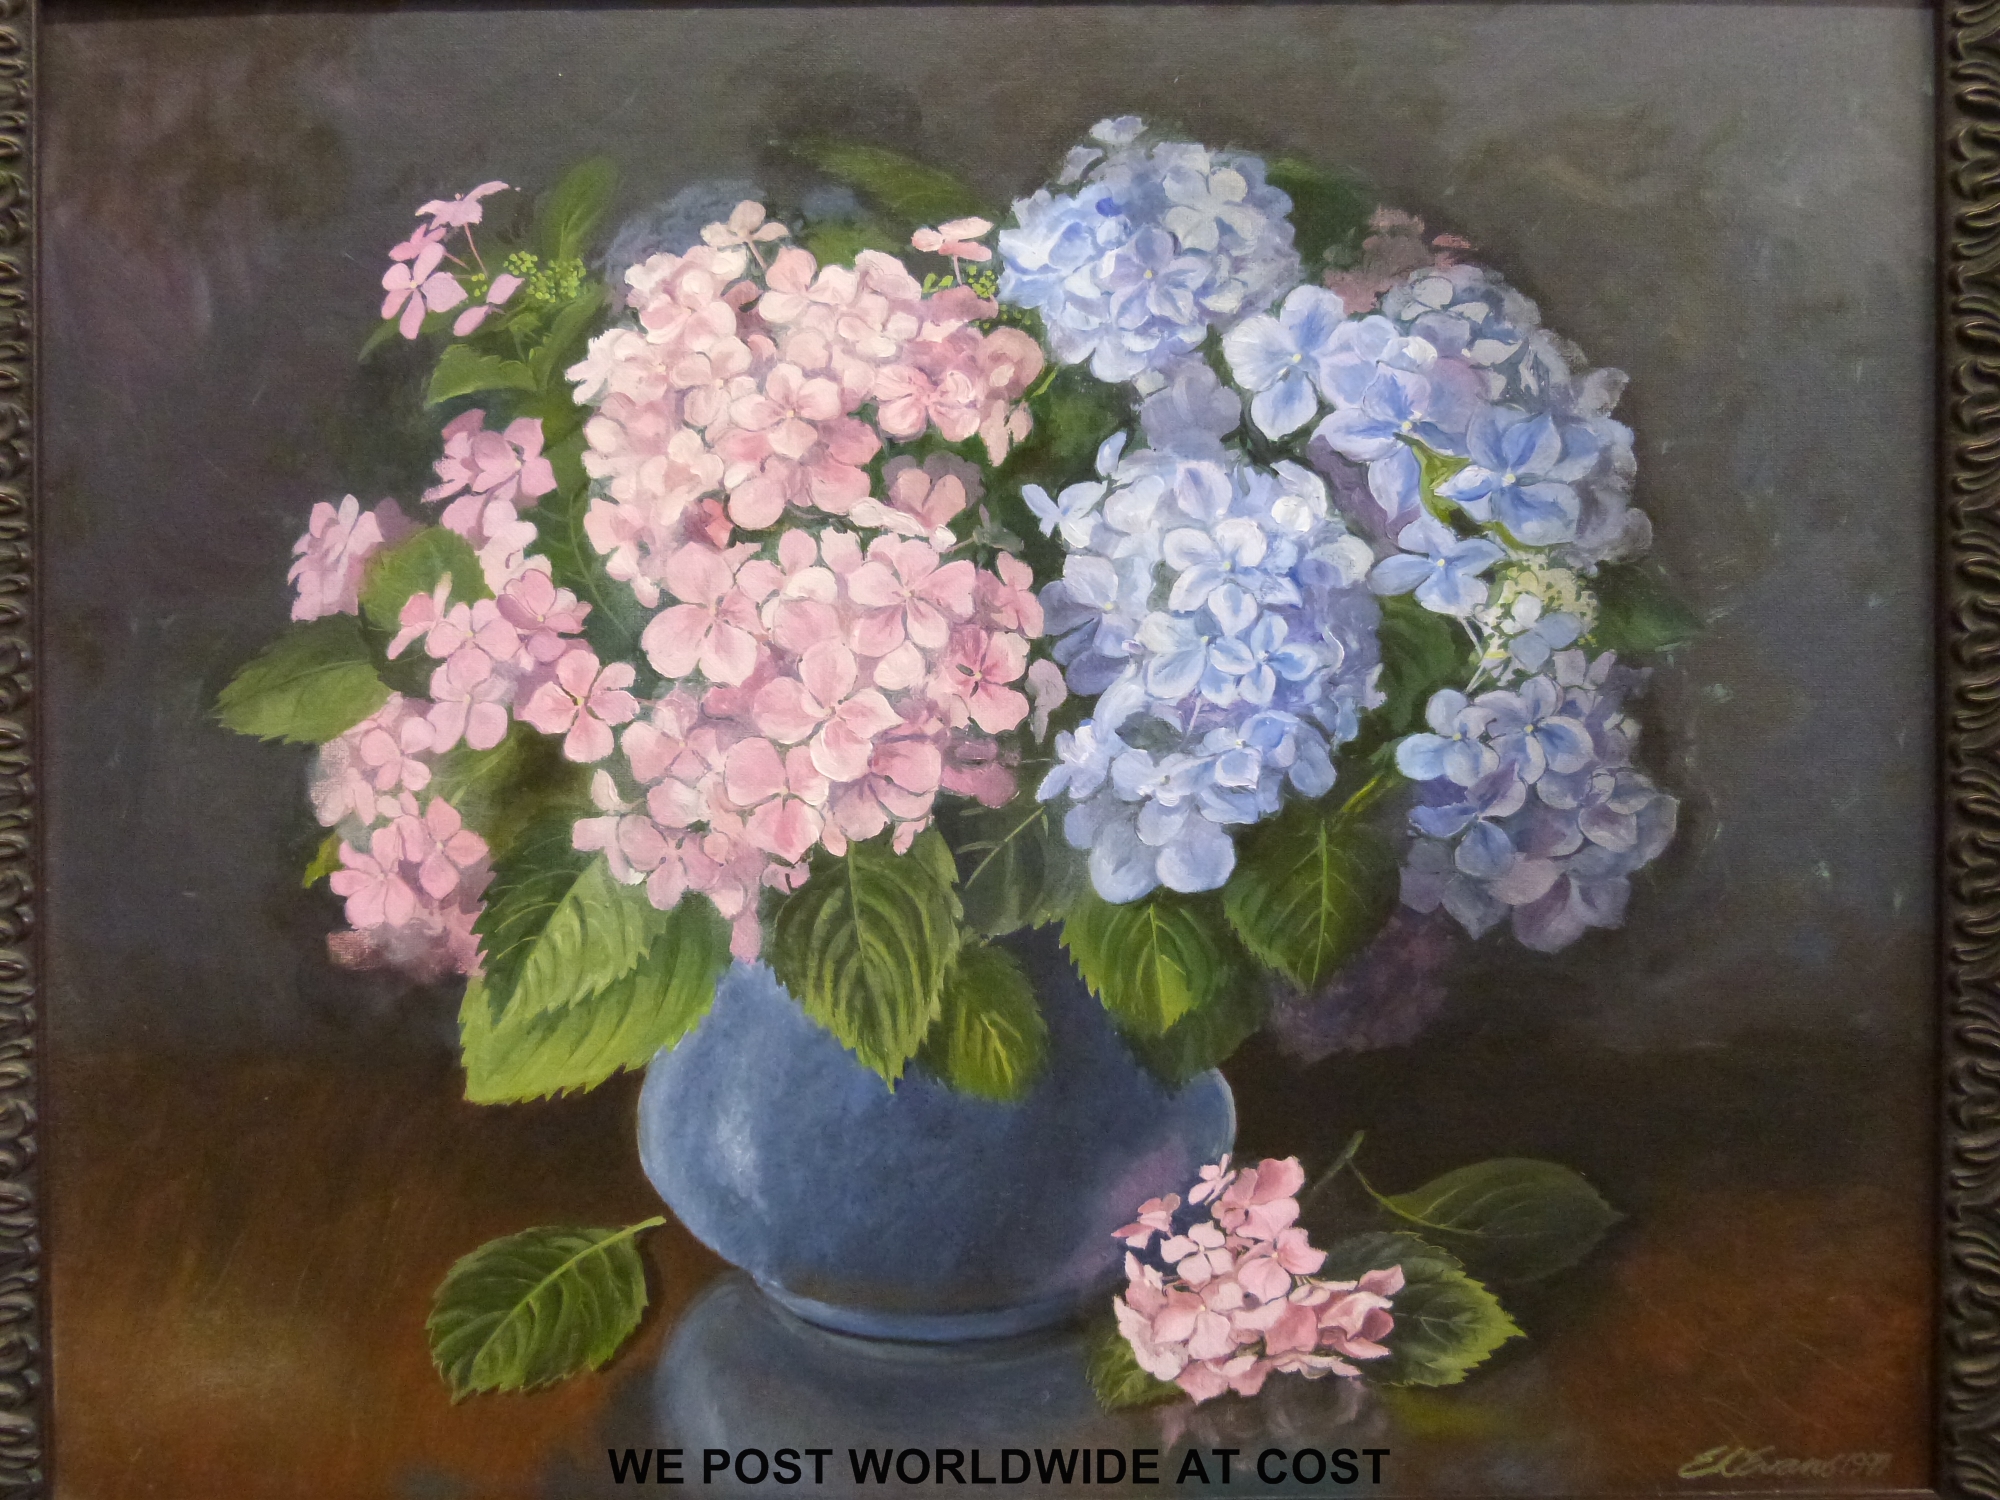 E L Evans oil on canvas still of hydrangeas in vase, signed and dated 1997 lower right,